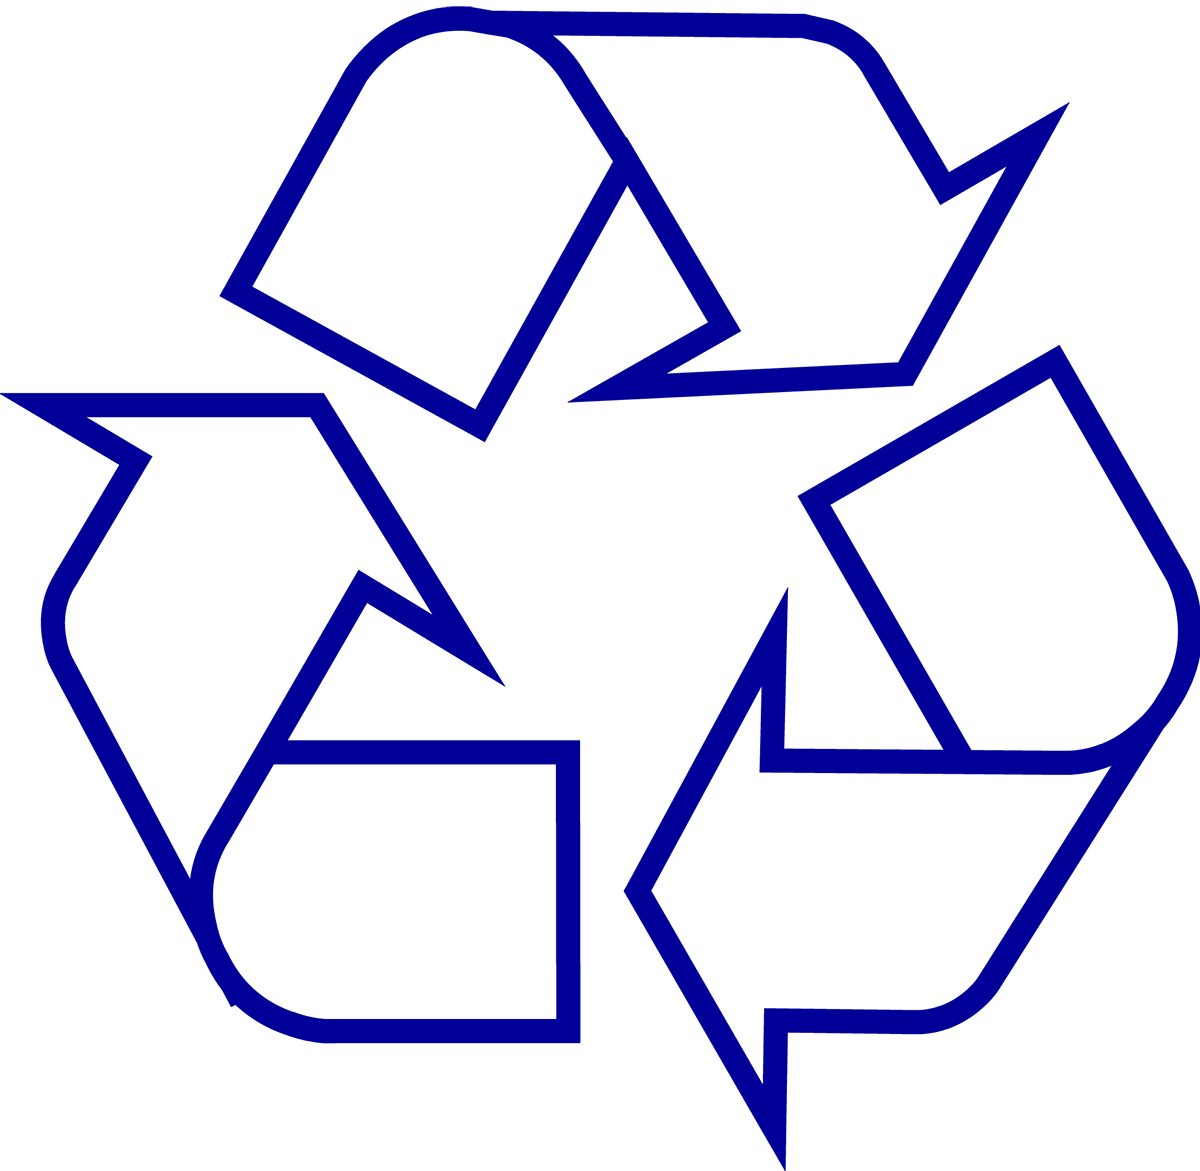 Blue and Green Sign Logo - Recycling Symbol - Download the Original Recycle Logo